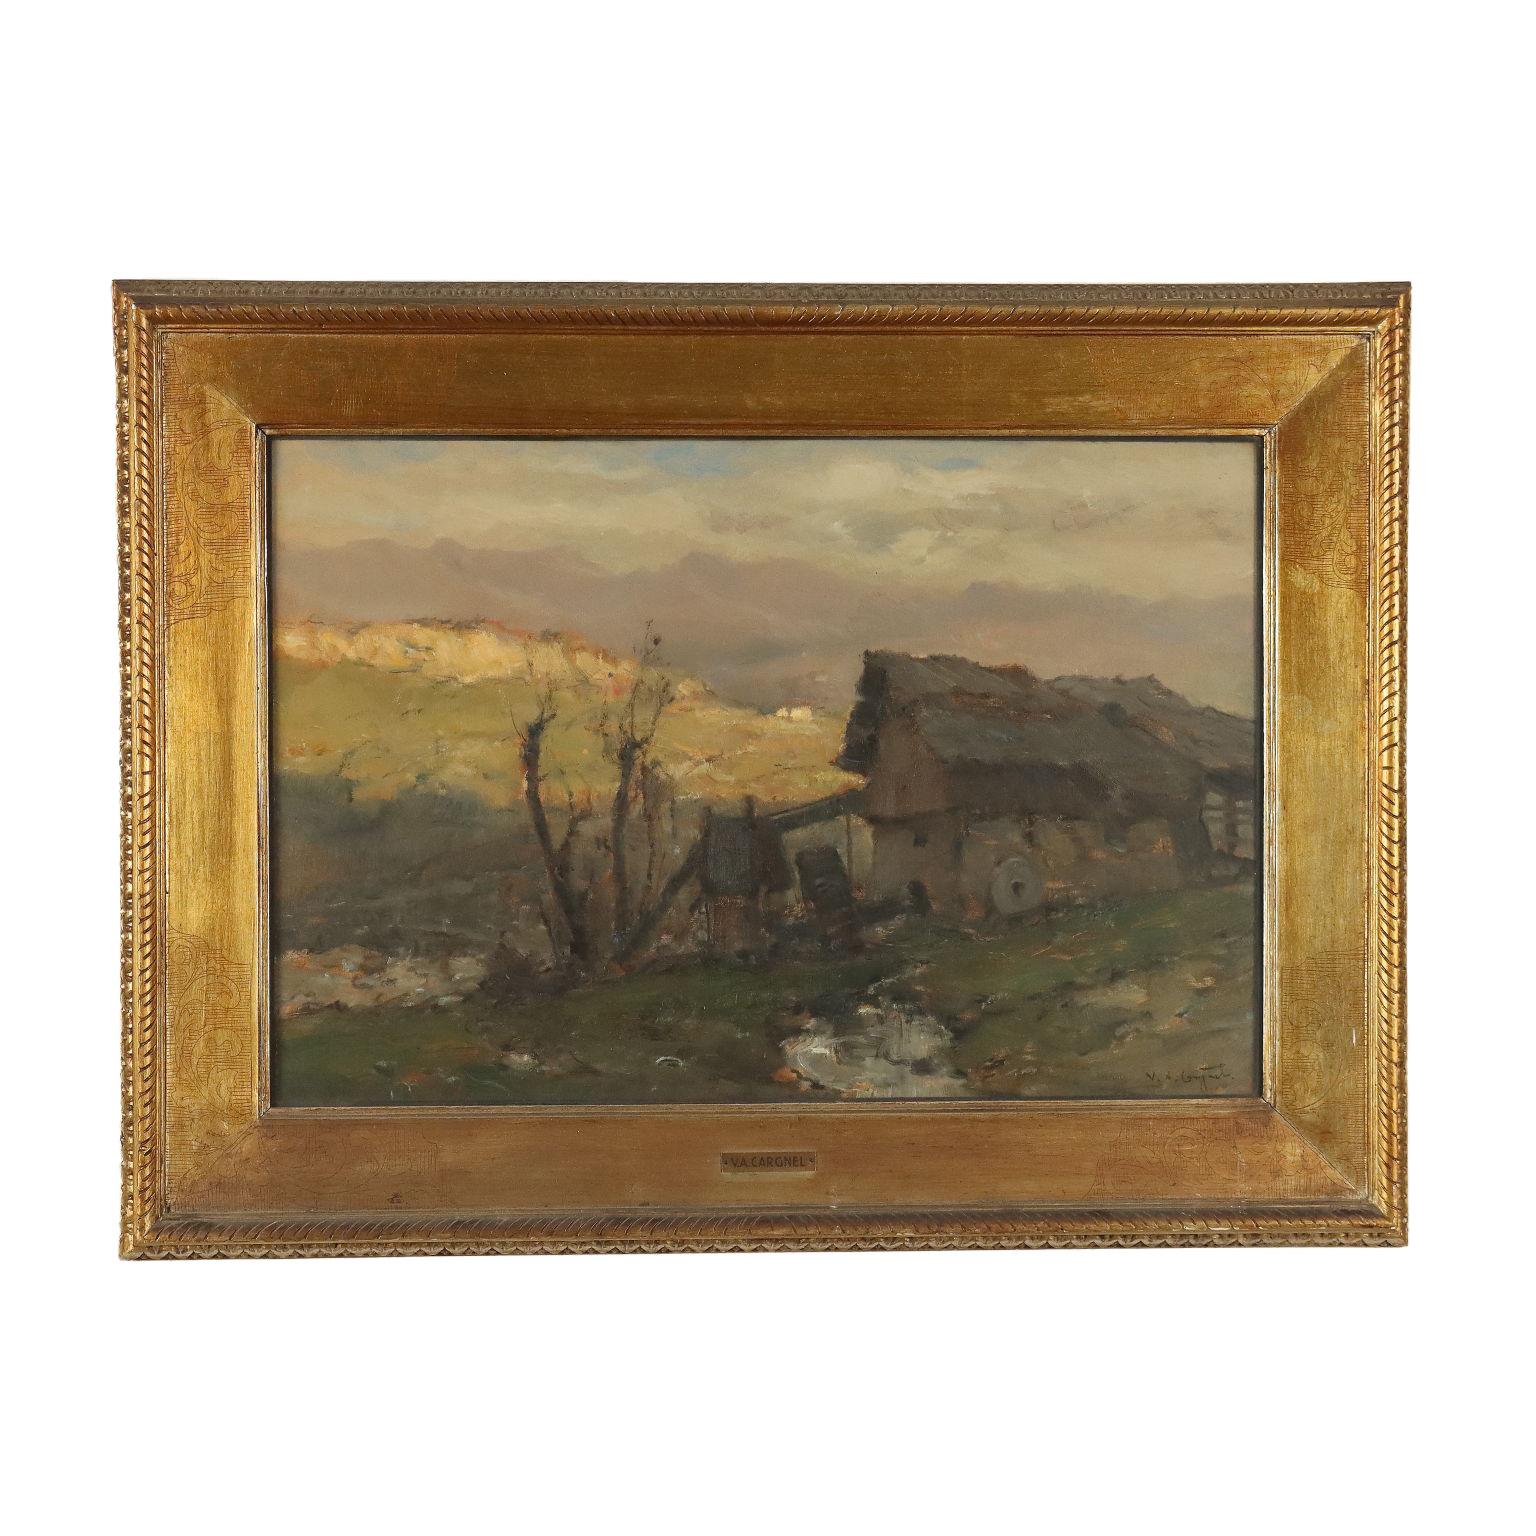 Unknown Landscape Painting - The Abandoned Mill Pofabbro 1928